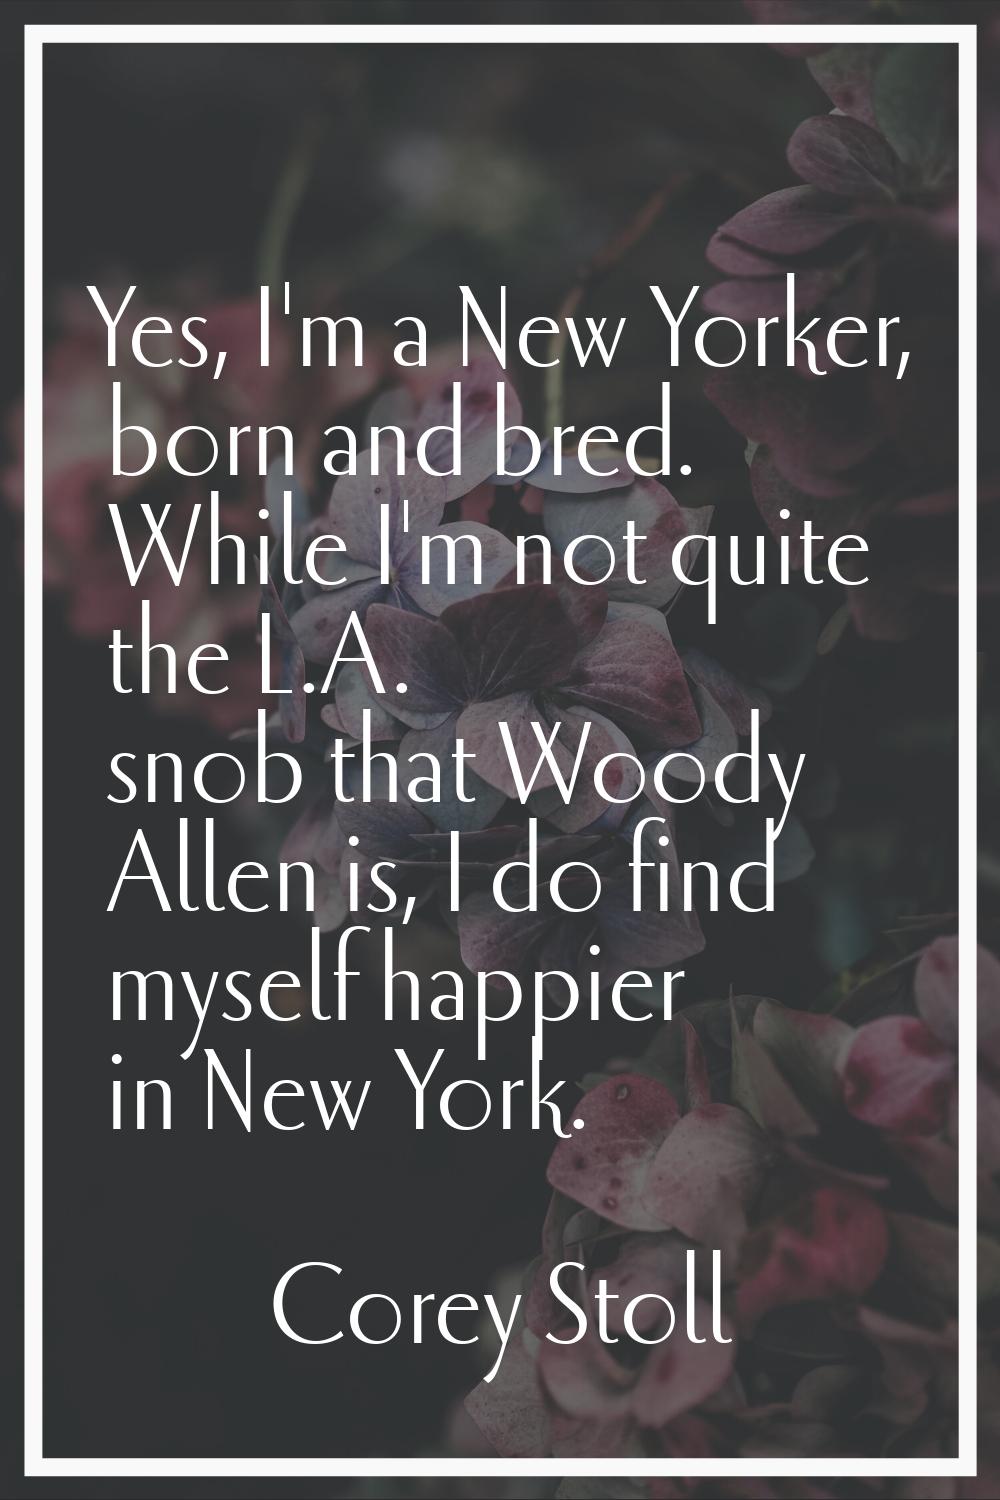 Yes, I'm a New Yorker, born and bred. While I'm not quite the L.A. snob that Woody Allen is, I do f